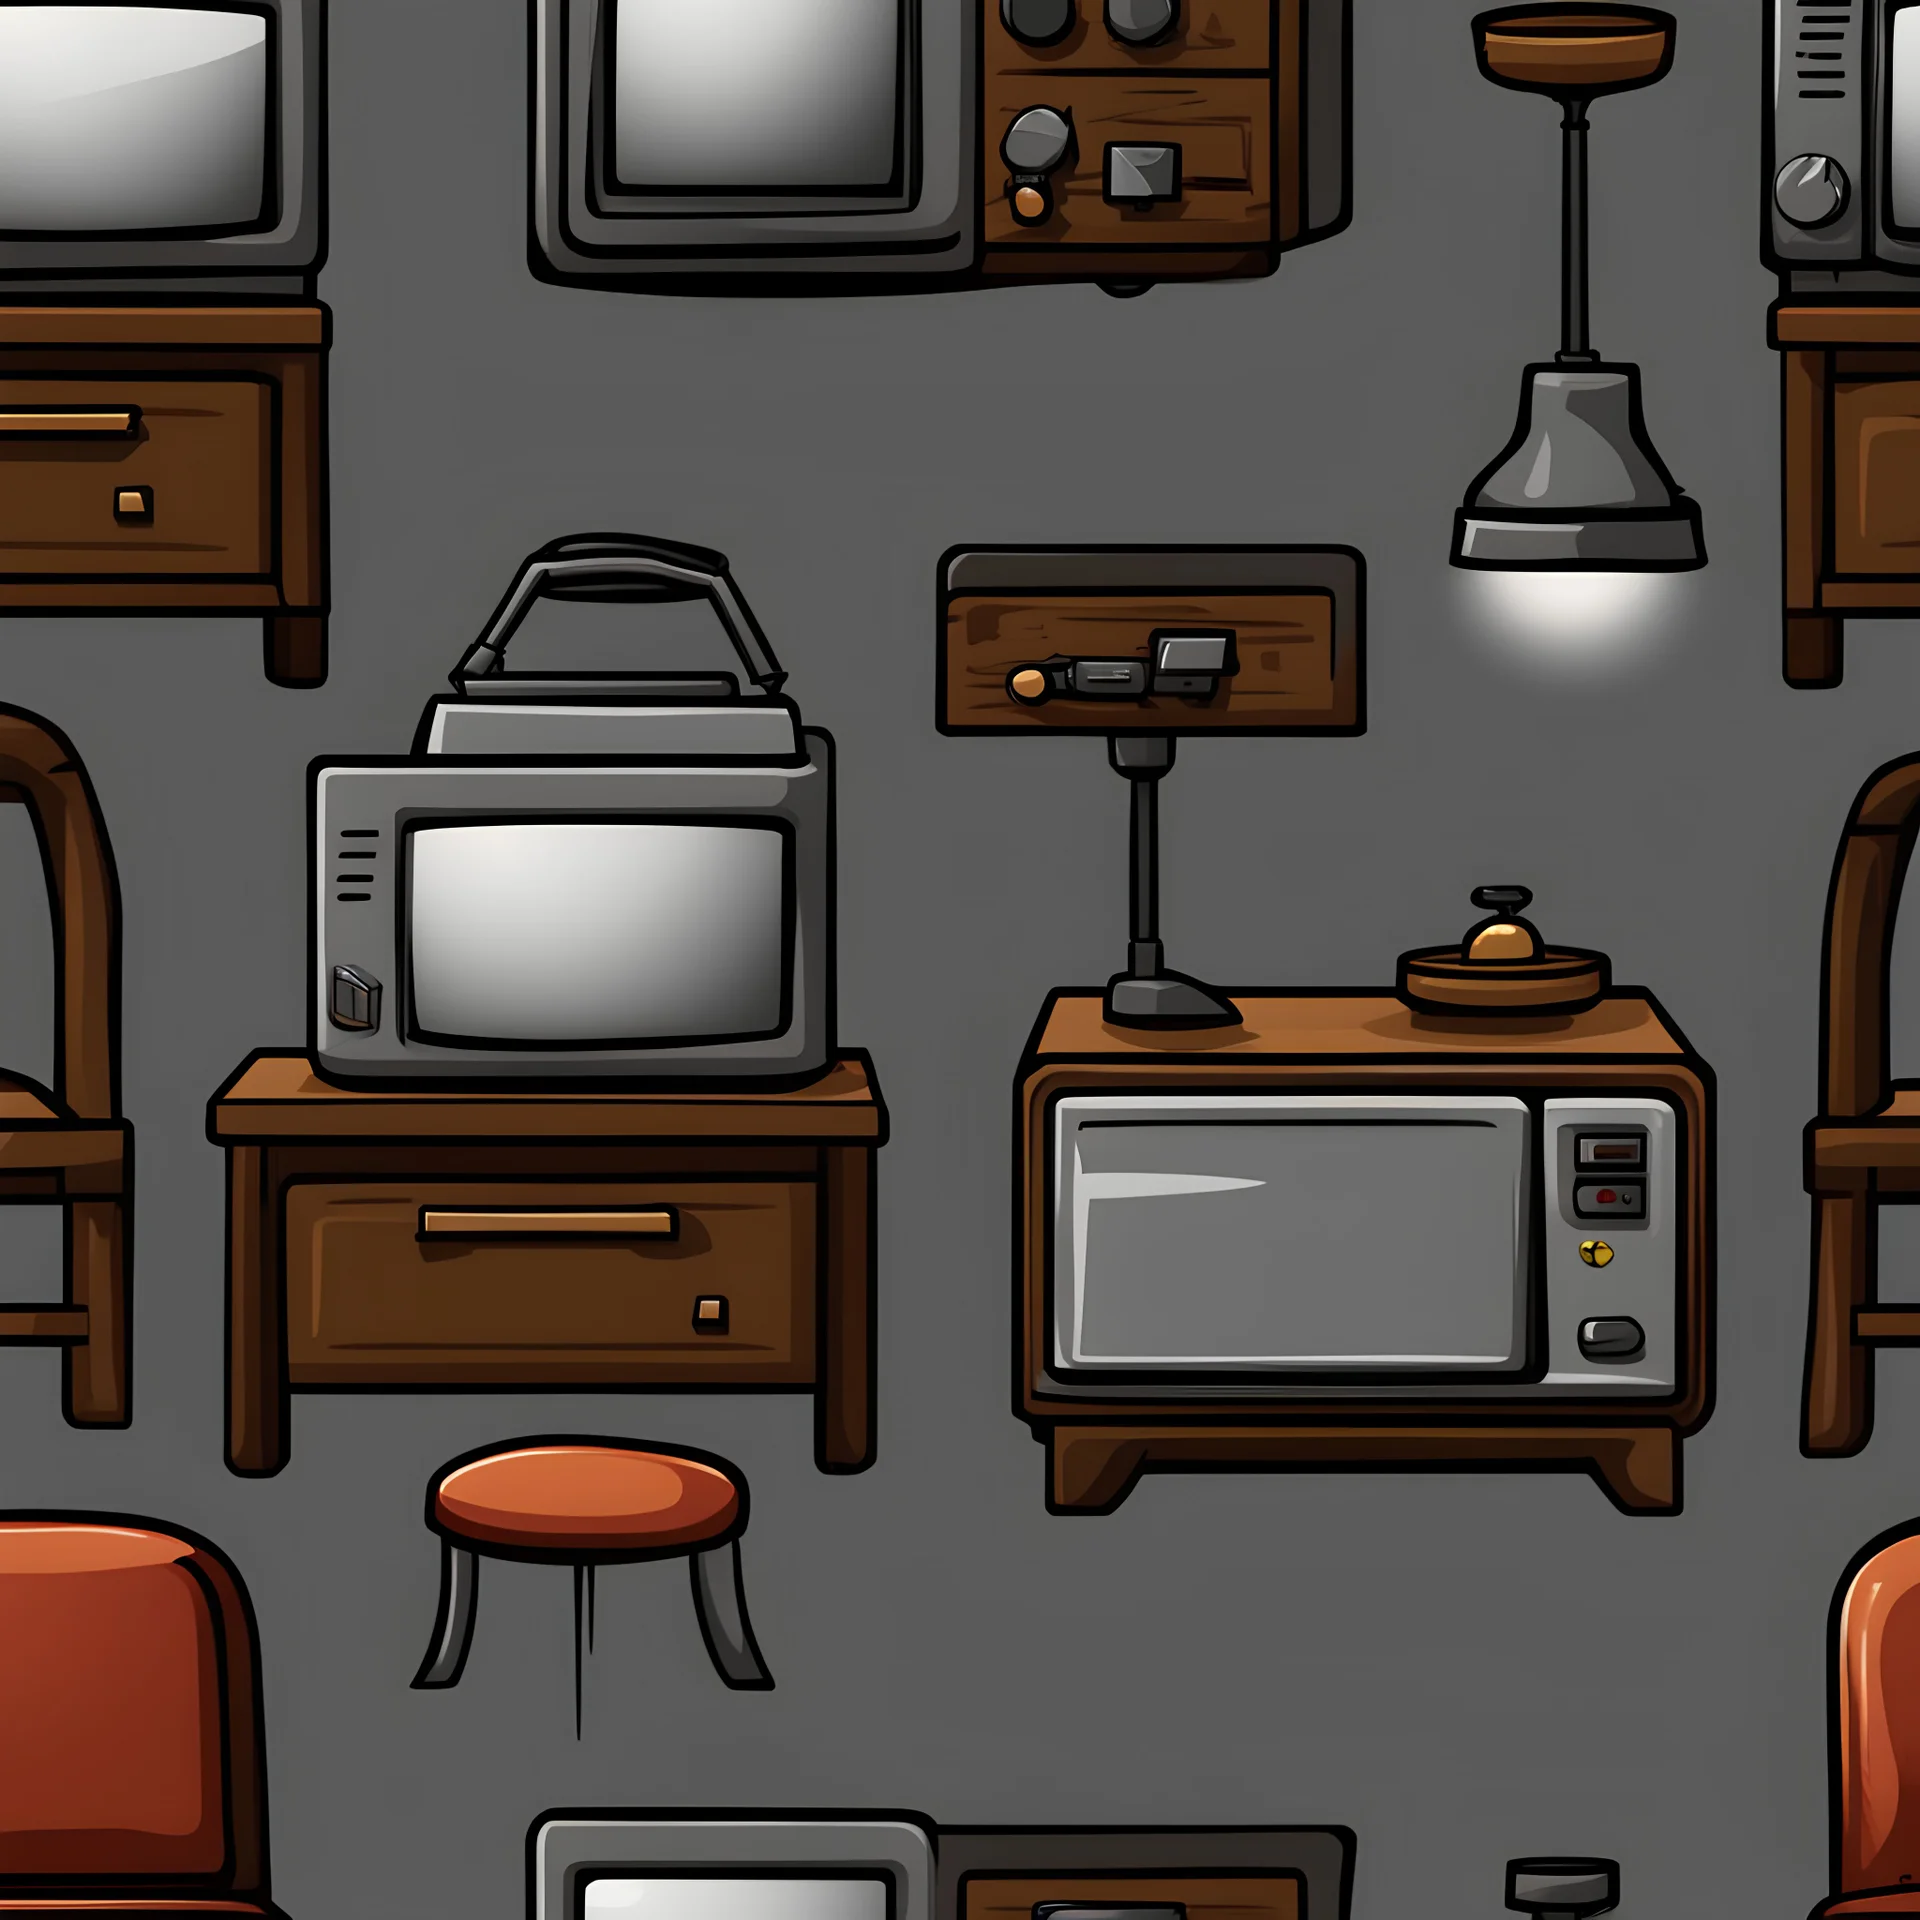 Sprite sheet, furniture, table, chair, television, lamp, toaster, icons, survival game, gray background, comic book,